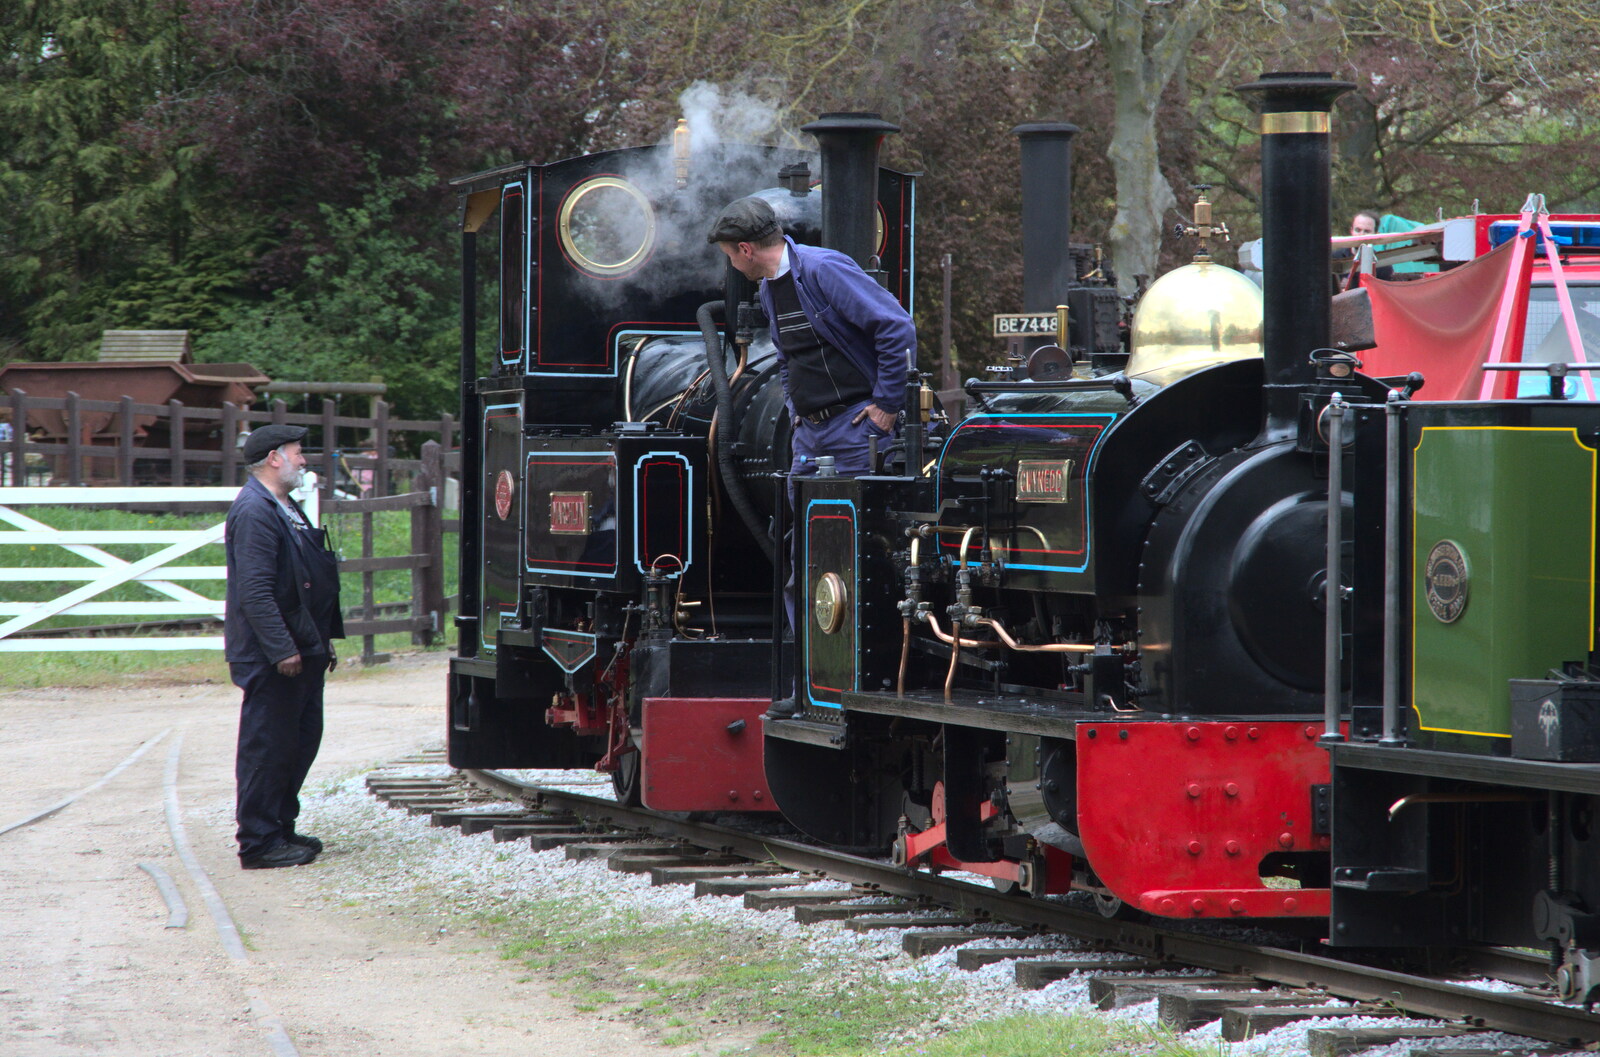 Gwynedd gets ready to return to the sheds from The Heritage Steam Gala, Bressingham Steam Museum, Norfolk - 1st May 2023